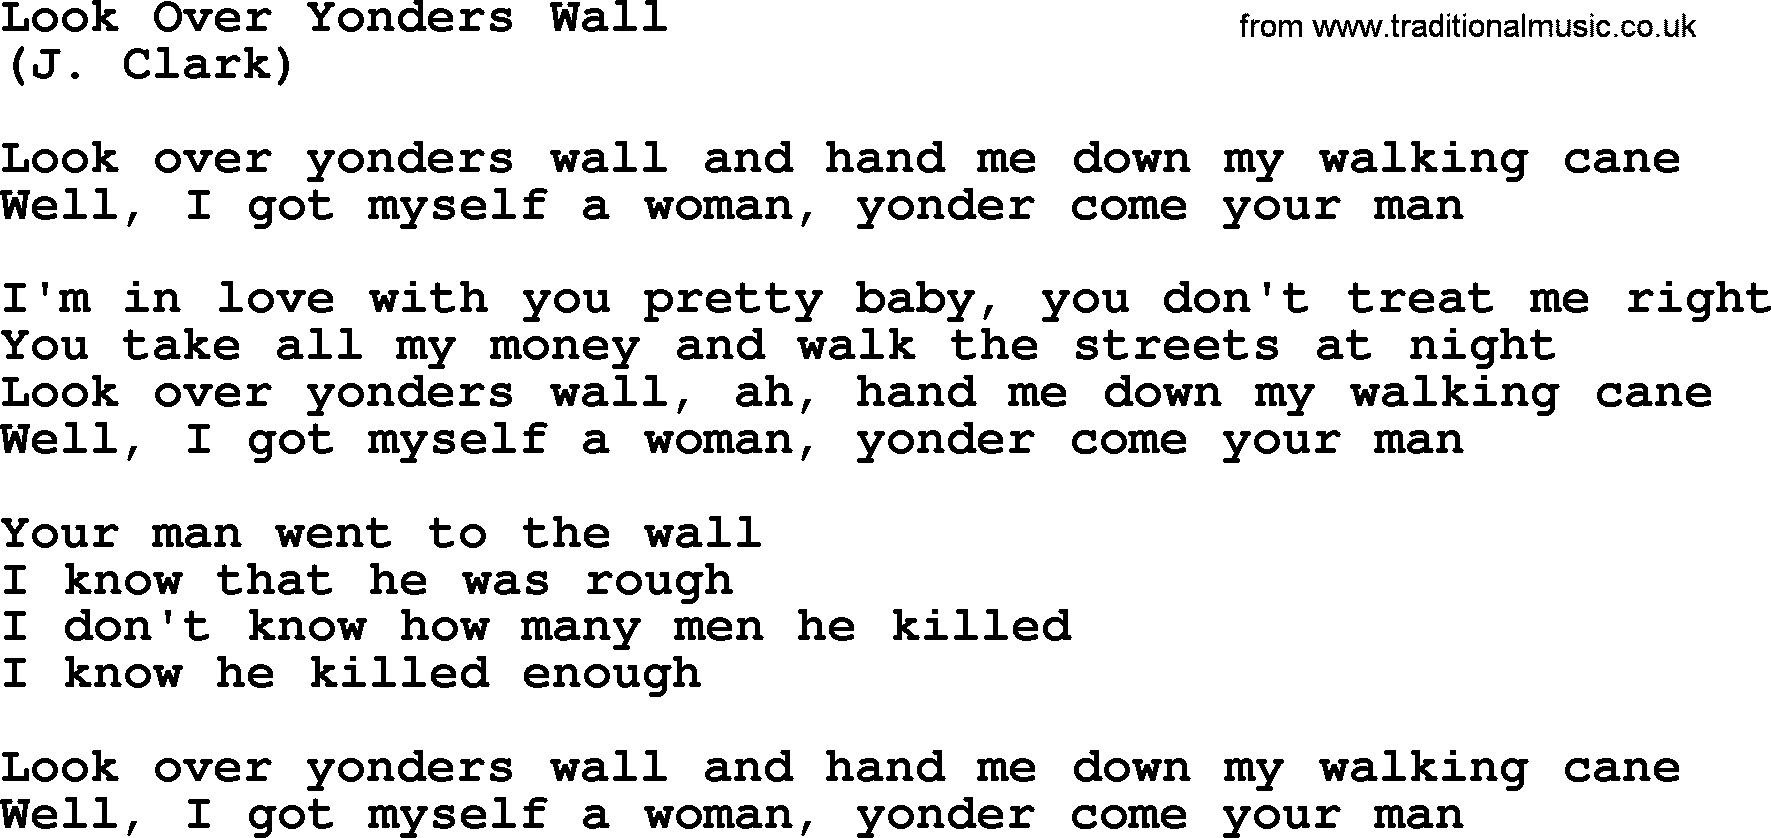 The Byrds song Look Over Yonders Wall, lyrics